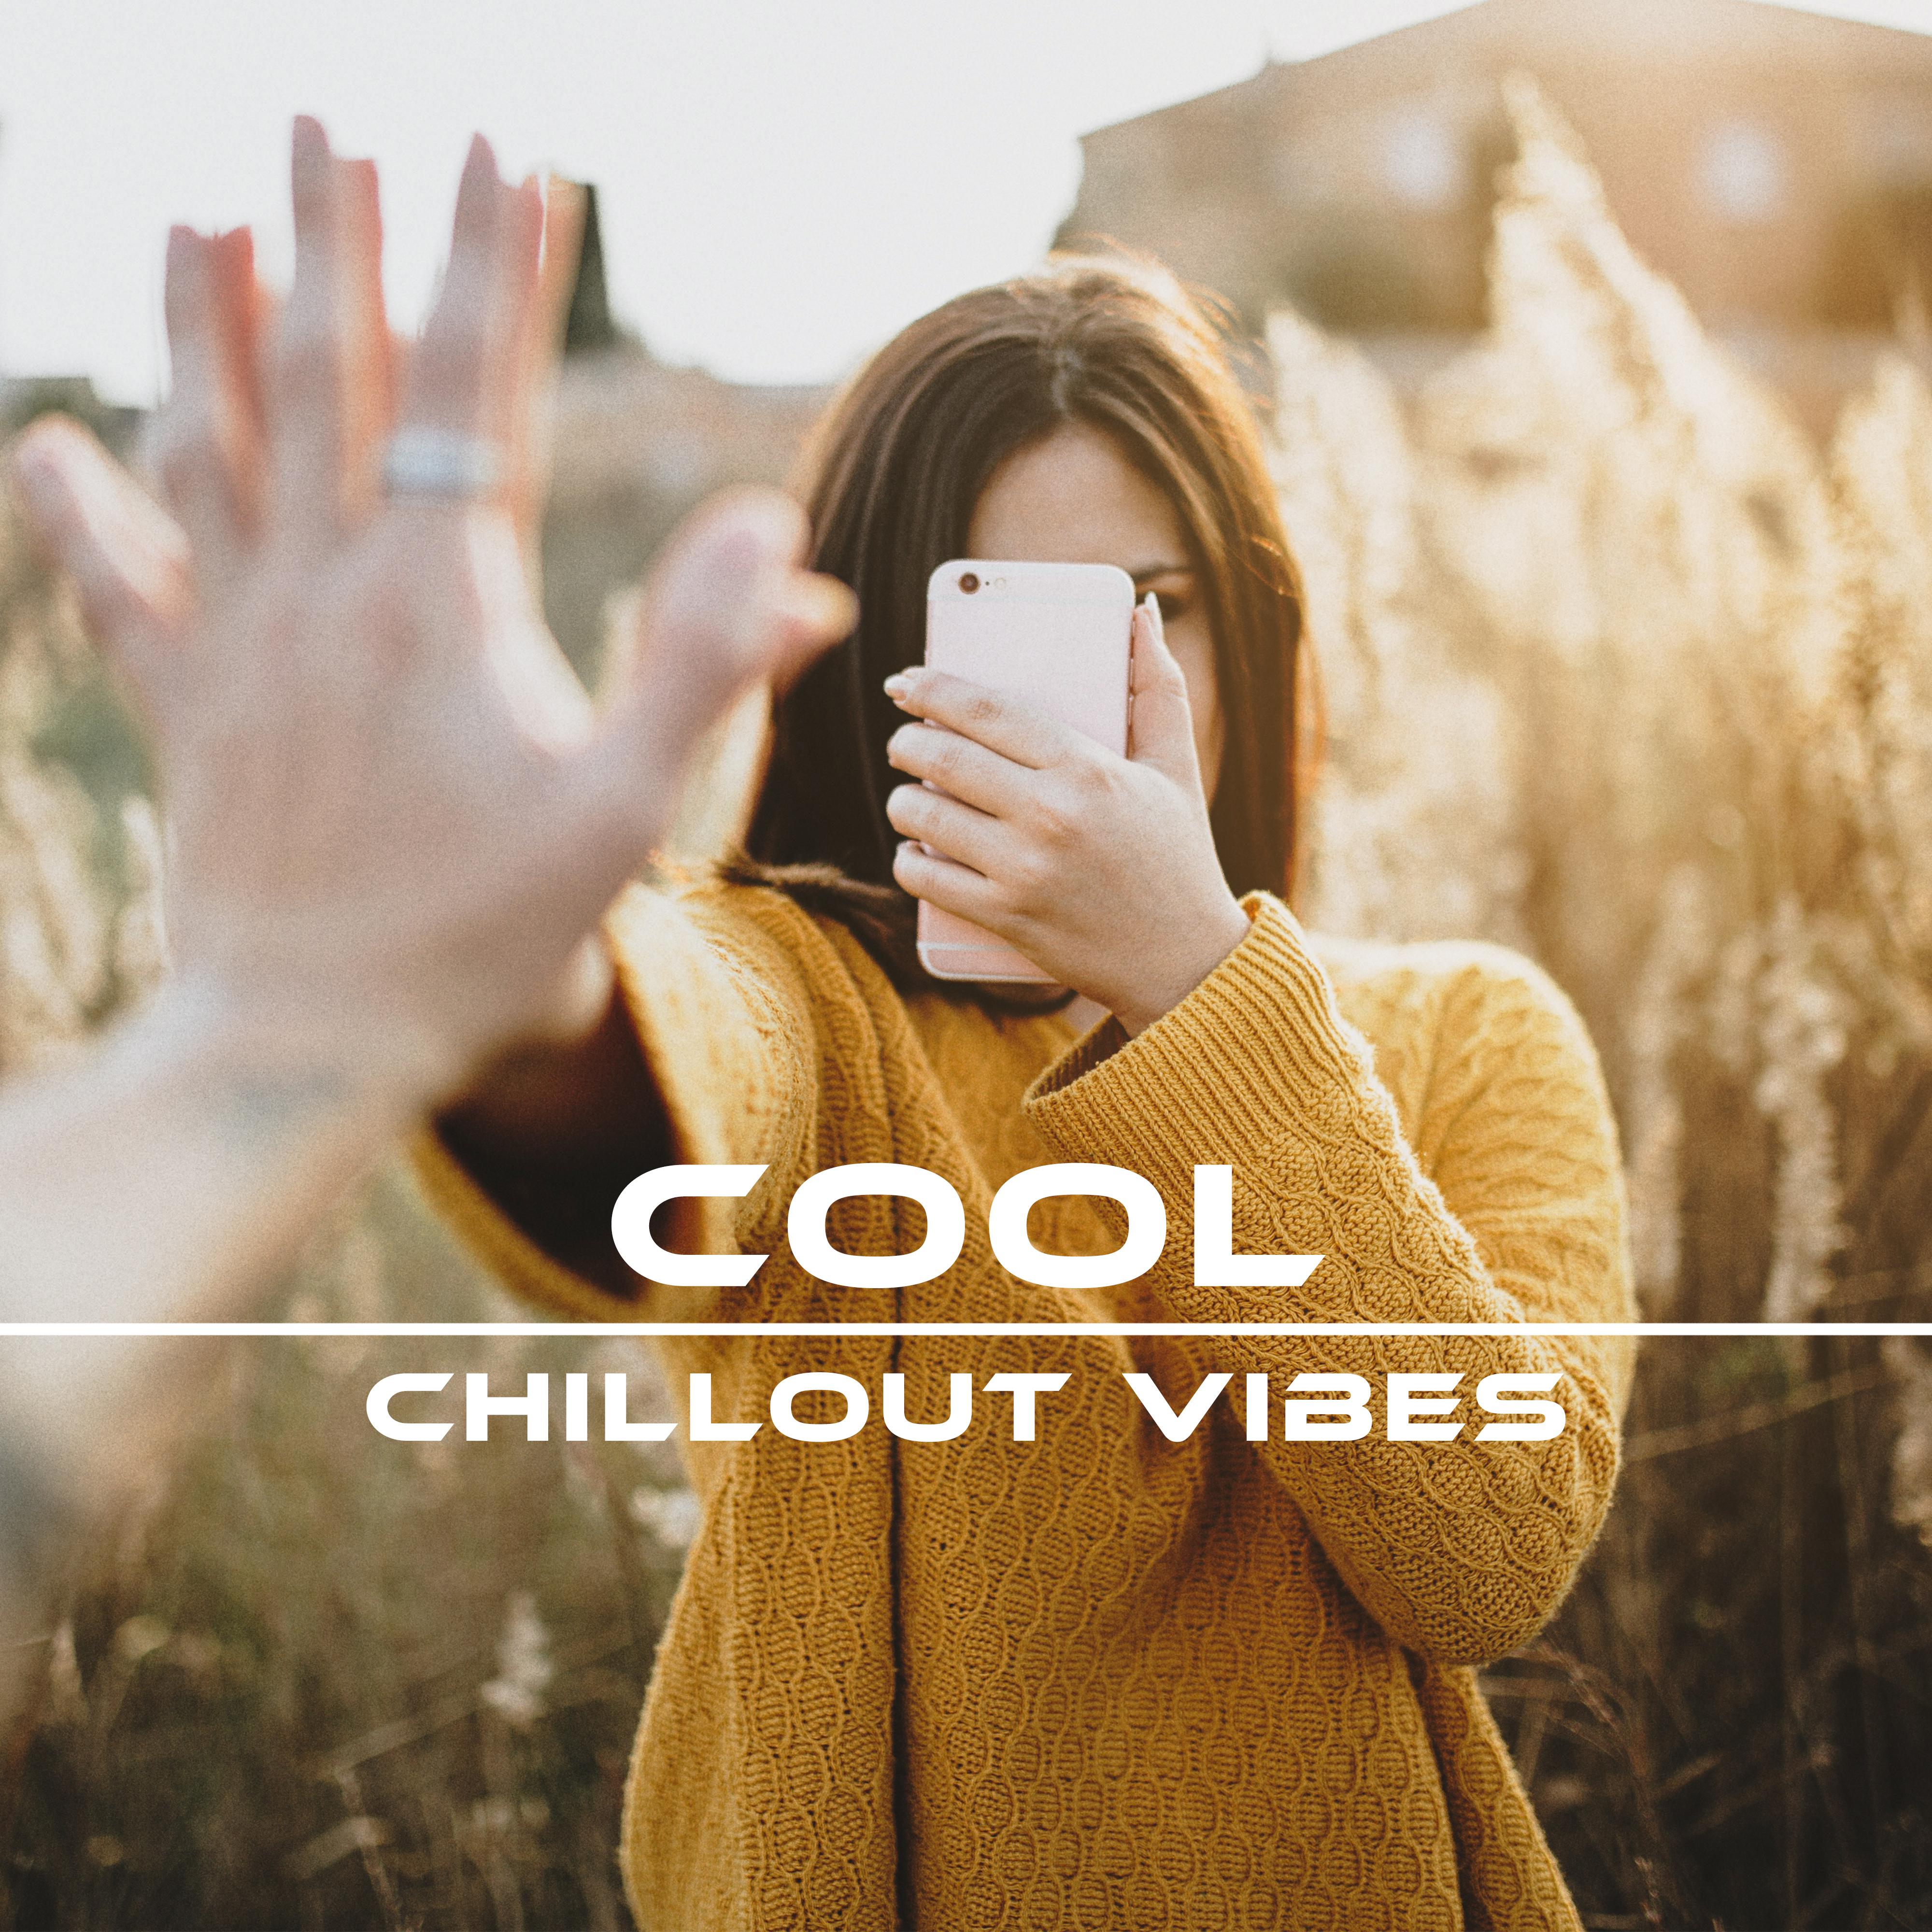 Cool Chillout Vibes – Cafe Music, Chill Out 2017, Smooth Chillout, Electronic Music